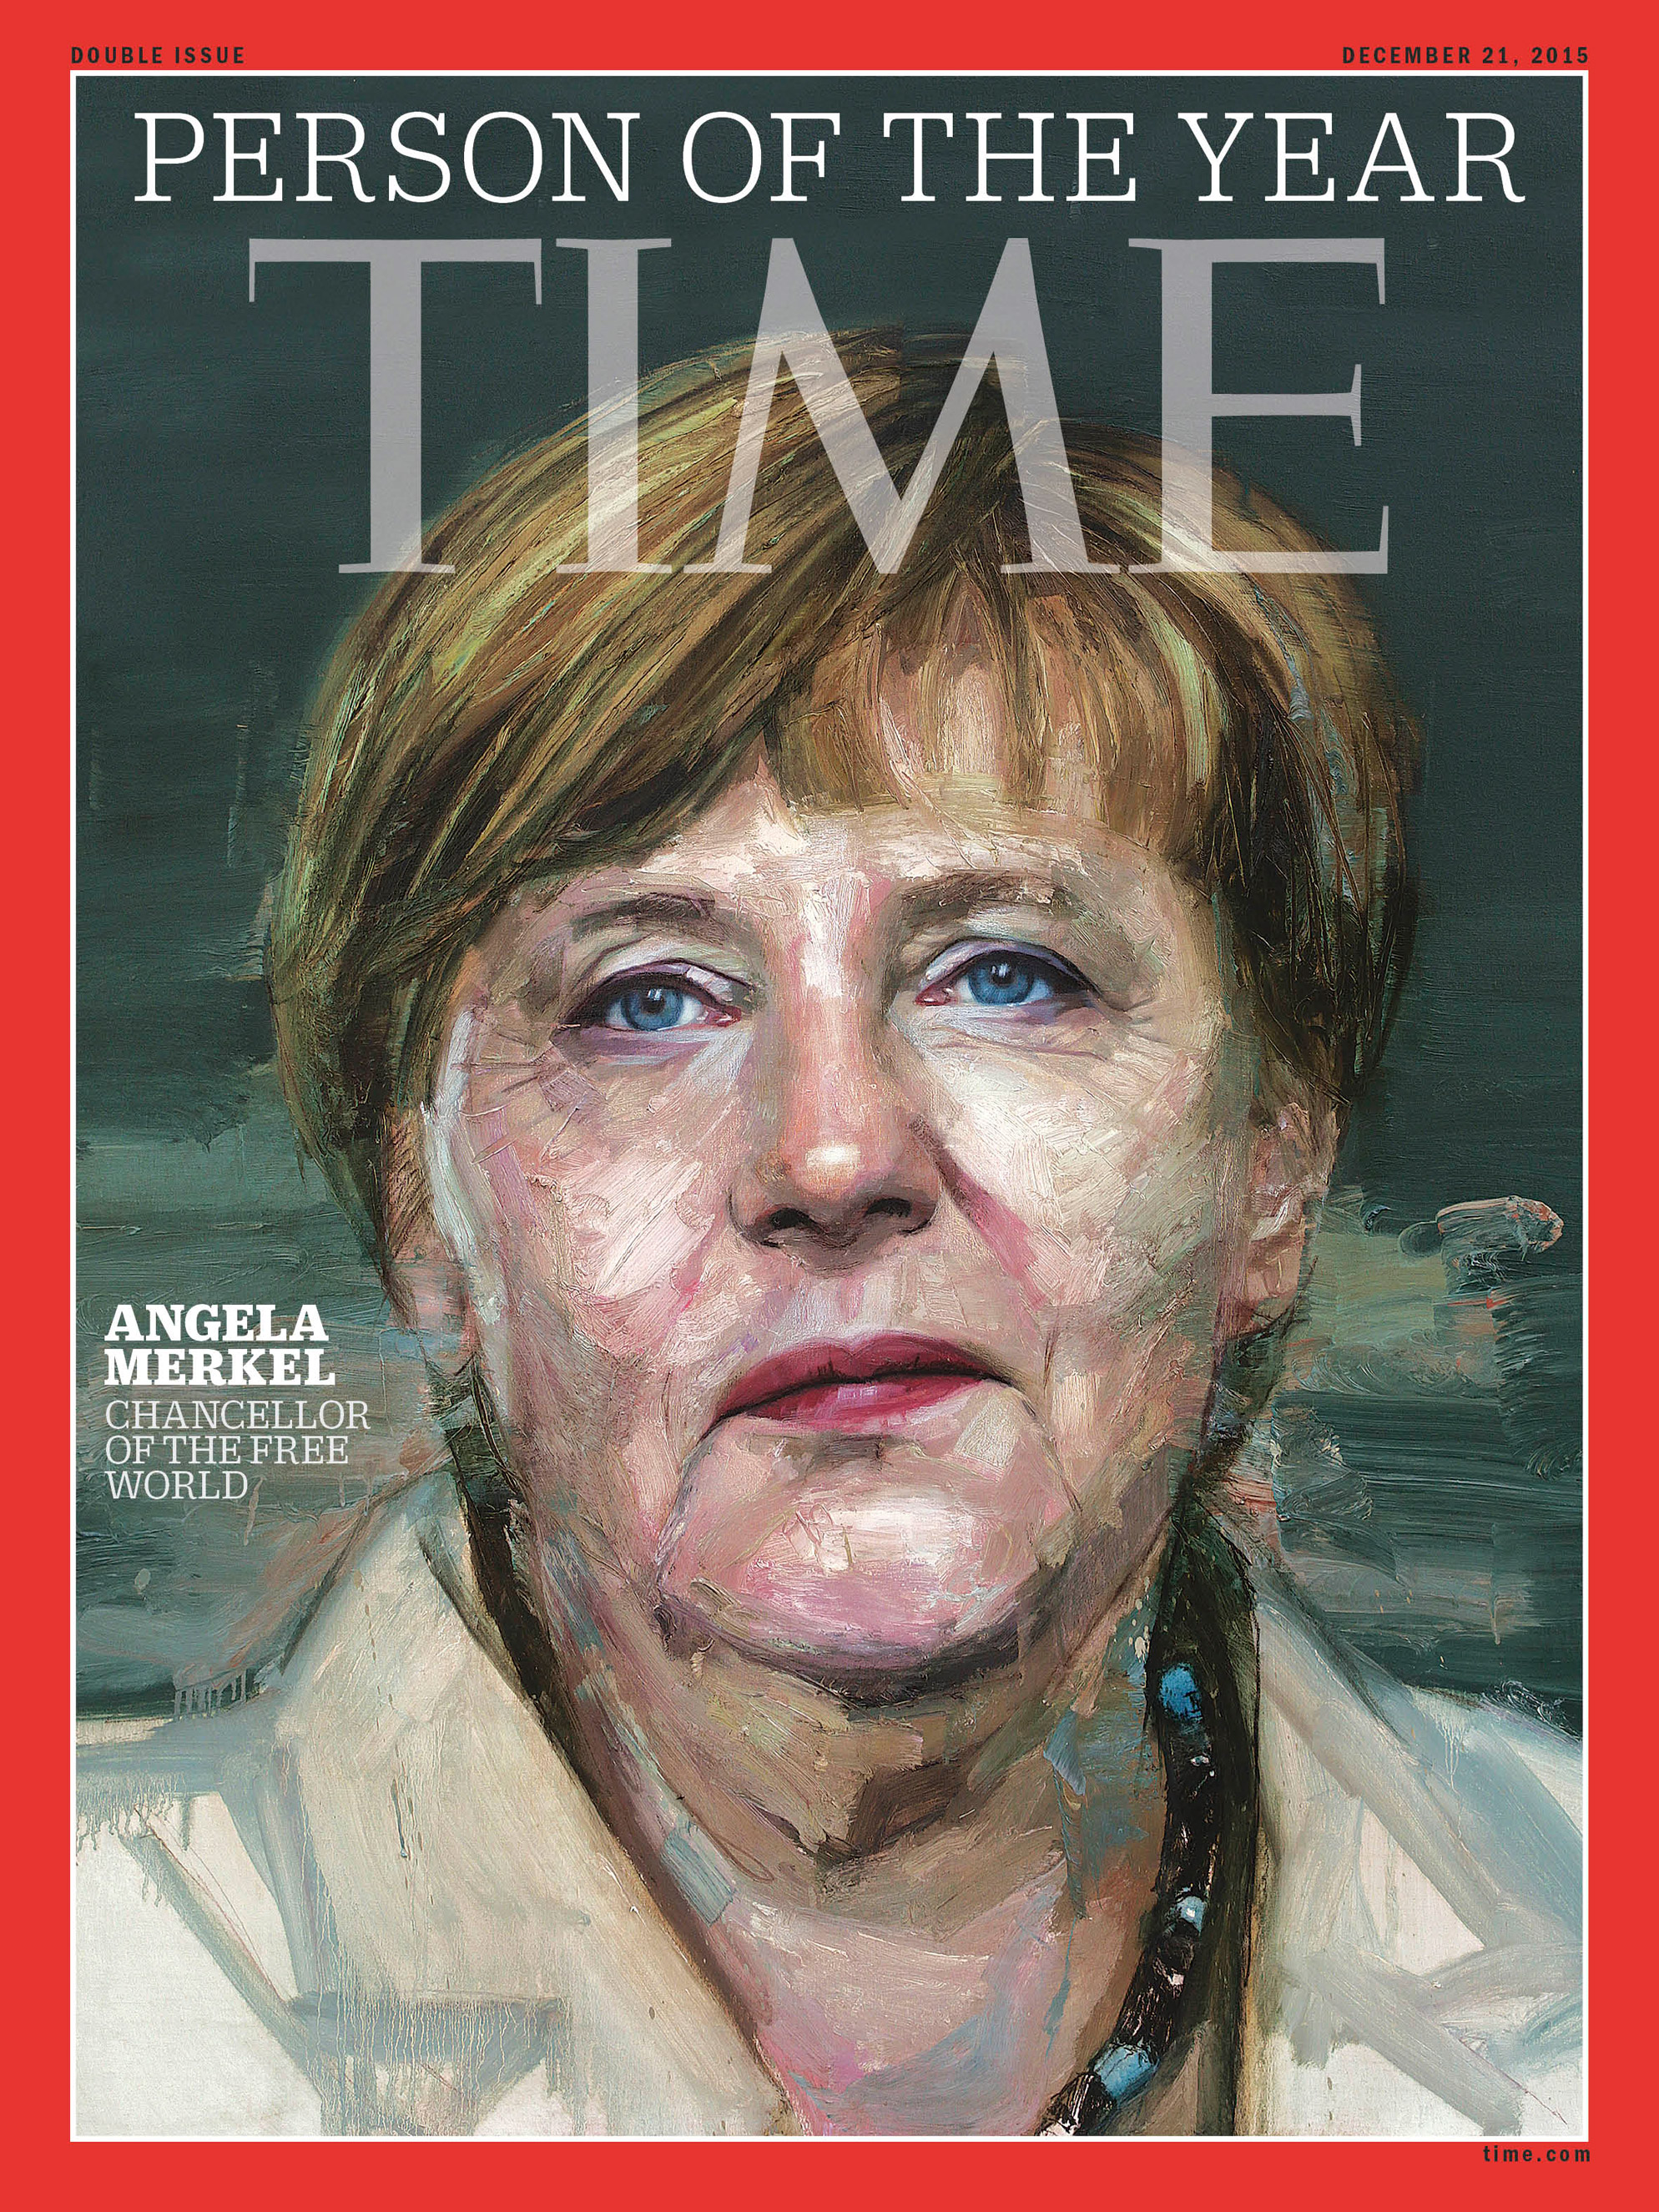 TIME person of the year angela merkel 2015